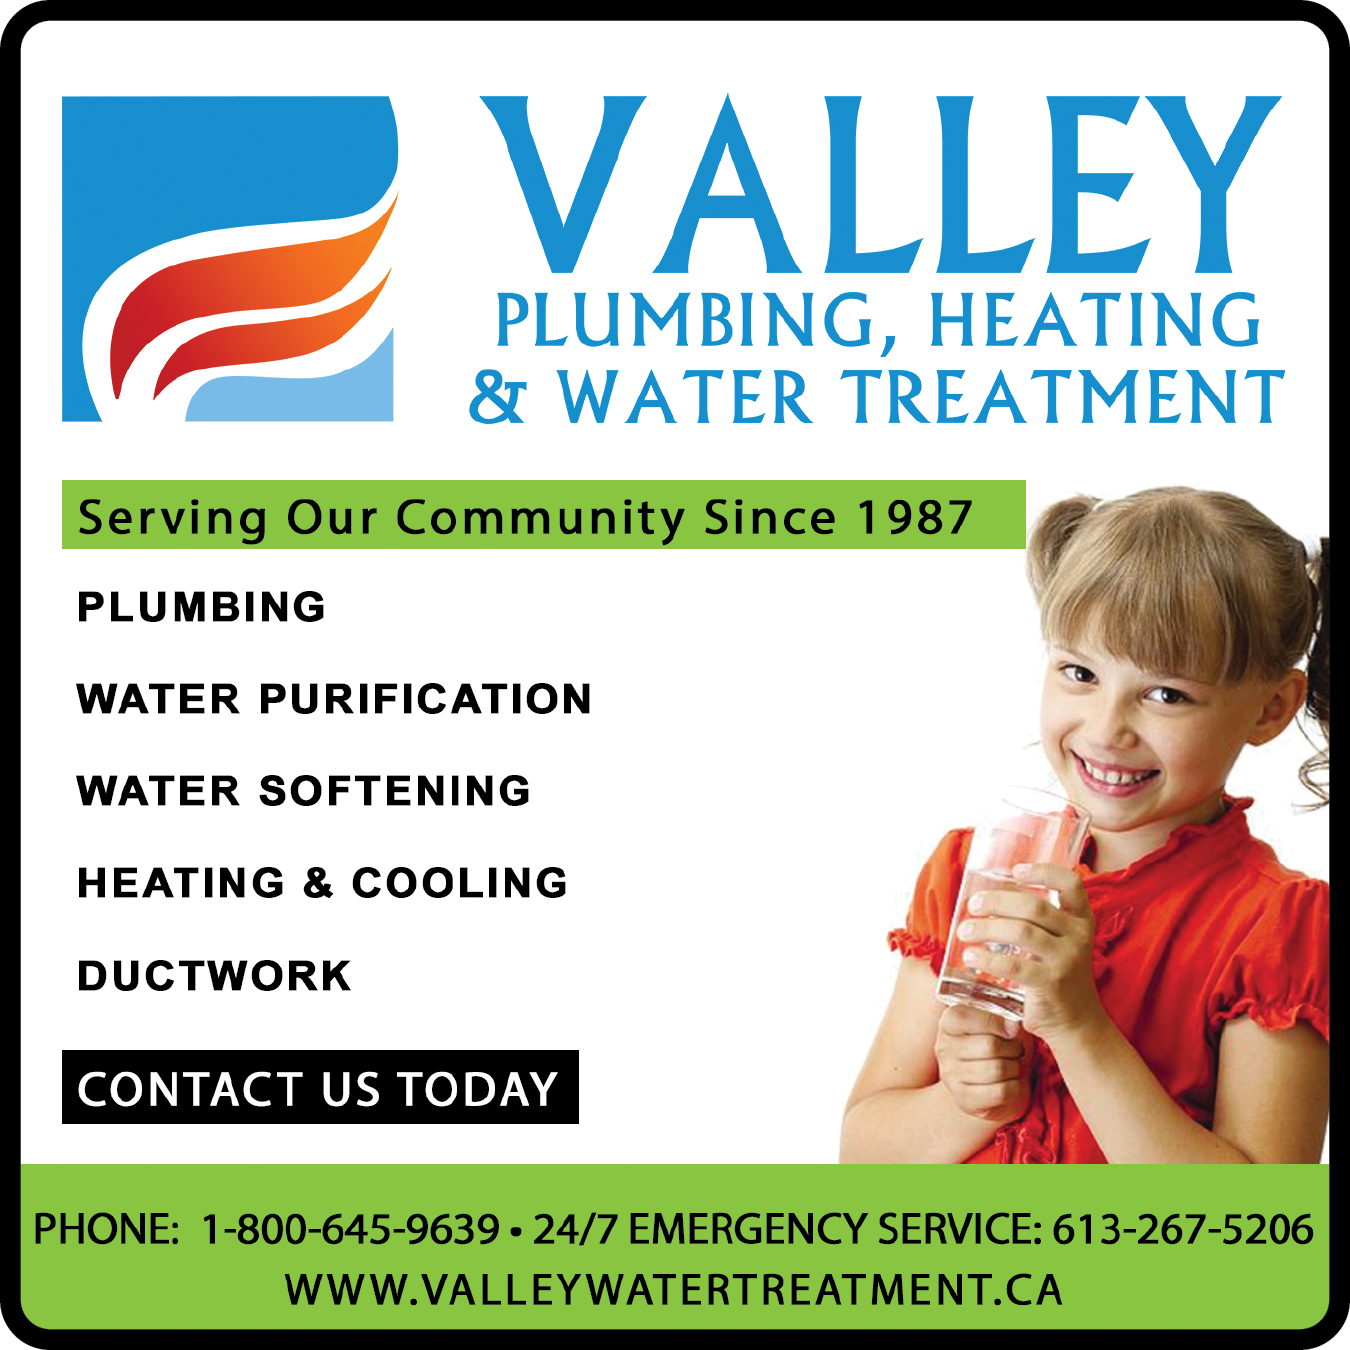 Valley Plumbing, Heating and Water Treatment